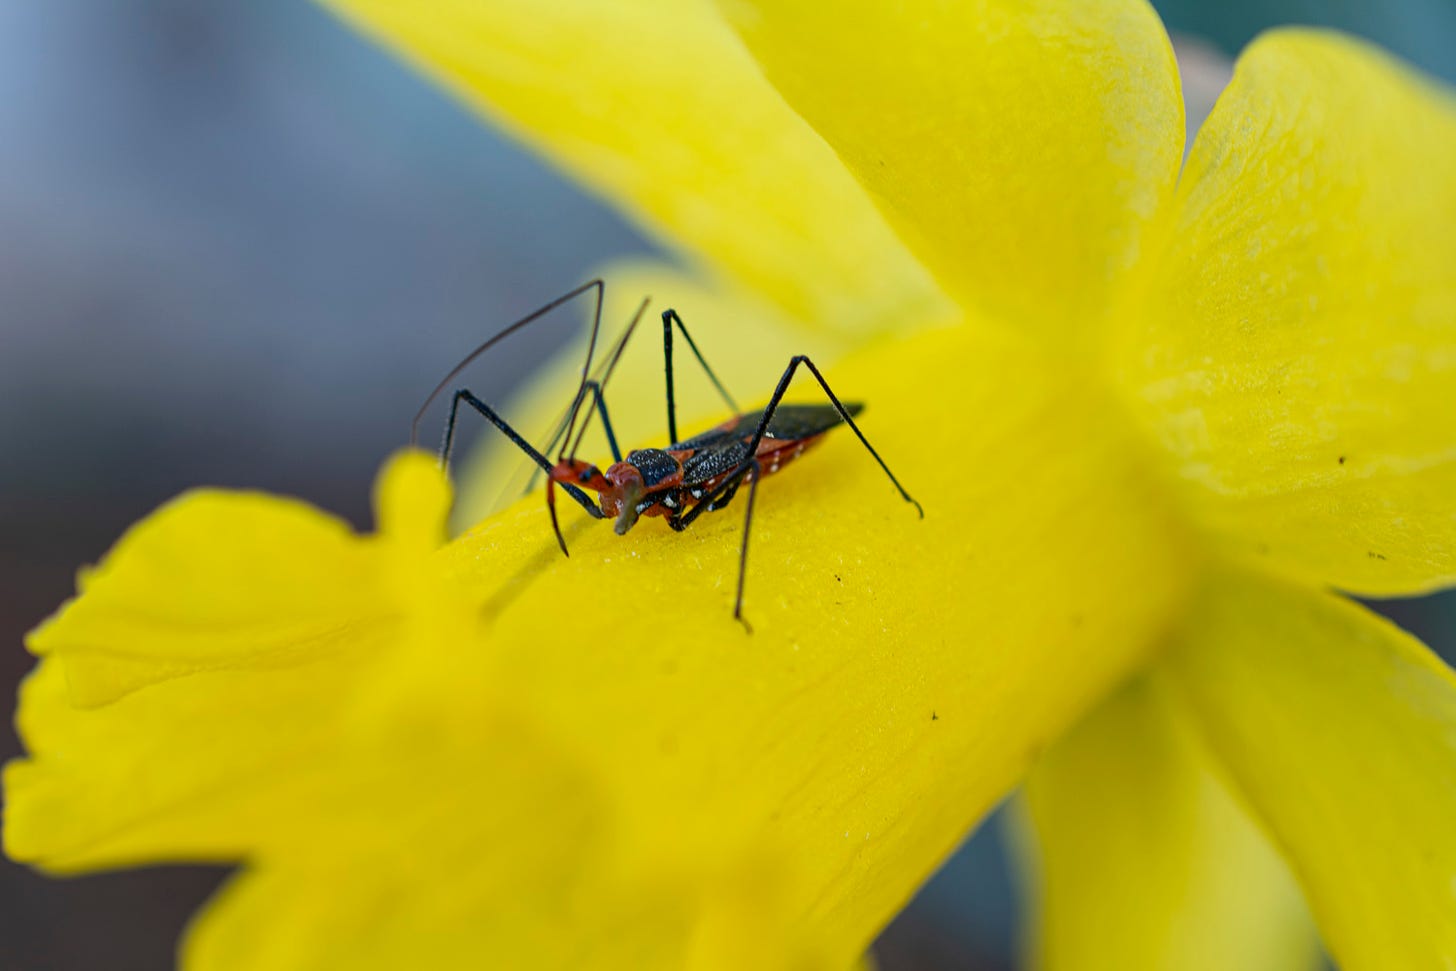 An Assassin bug on a yellow daffodil with blue blurred background